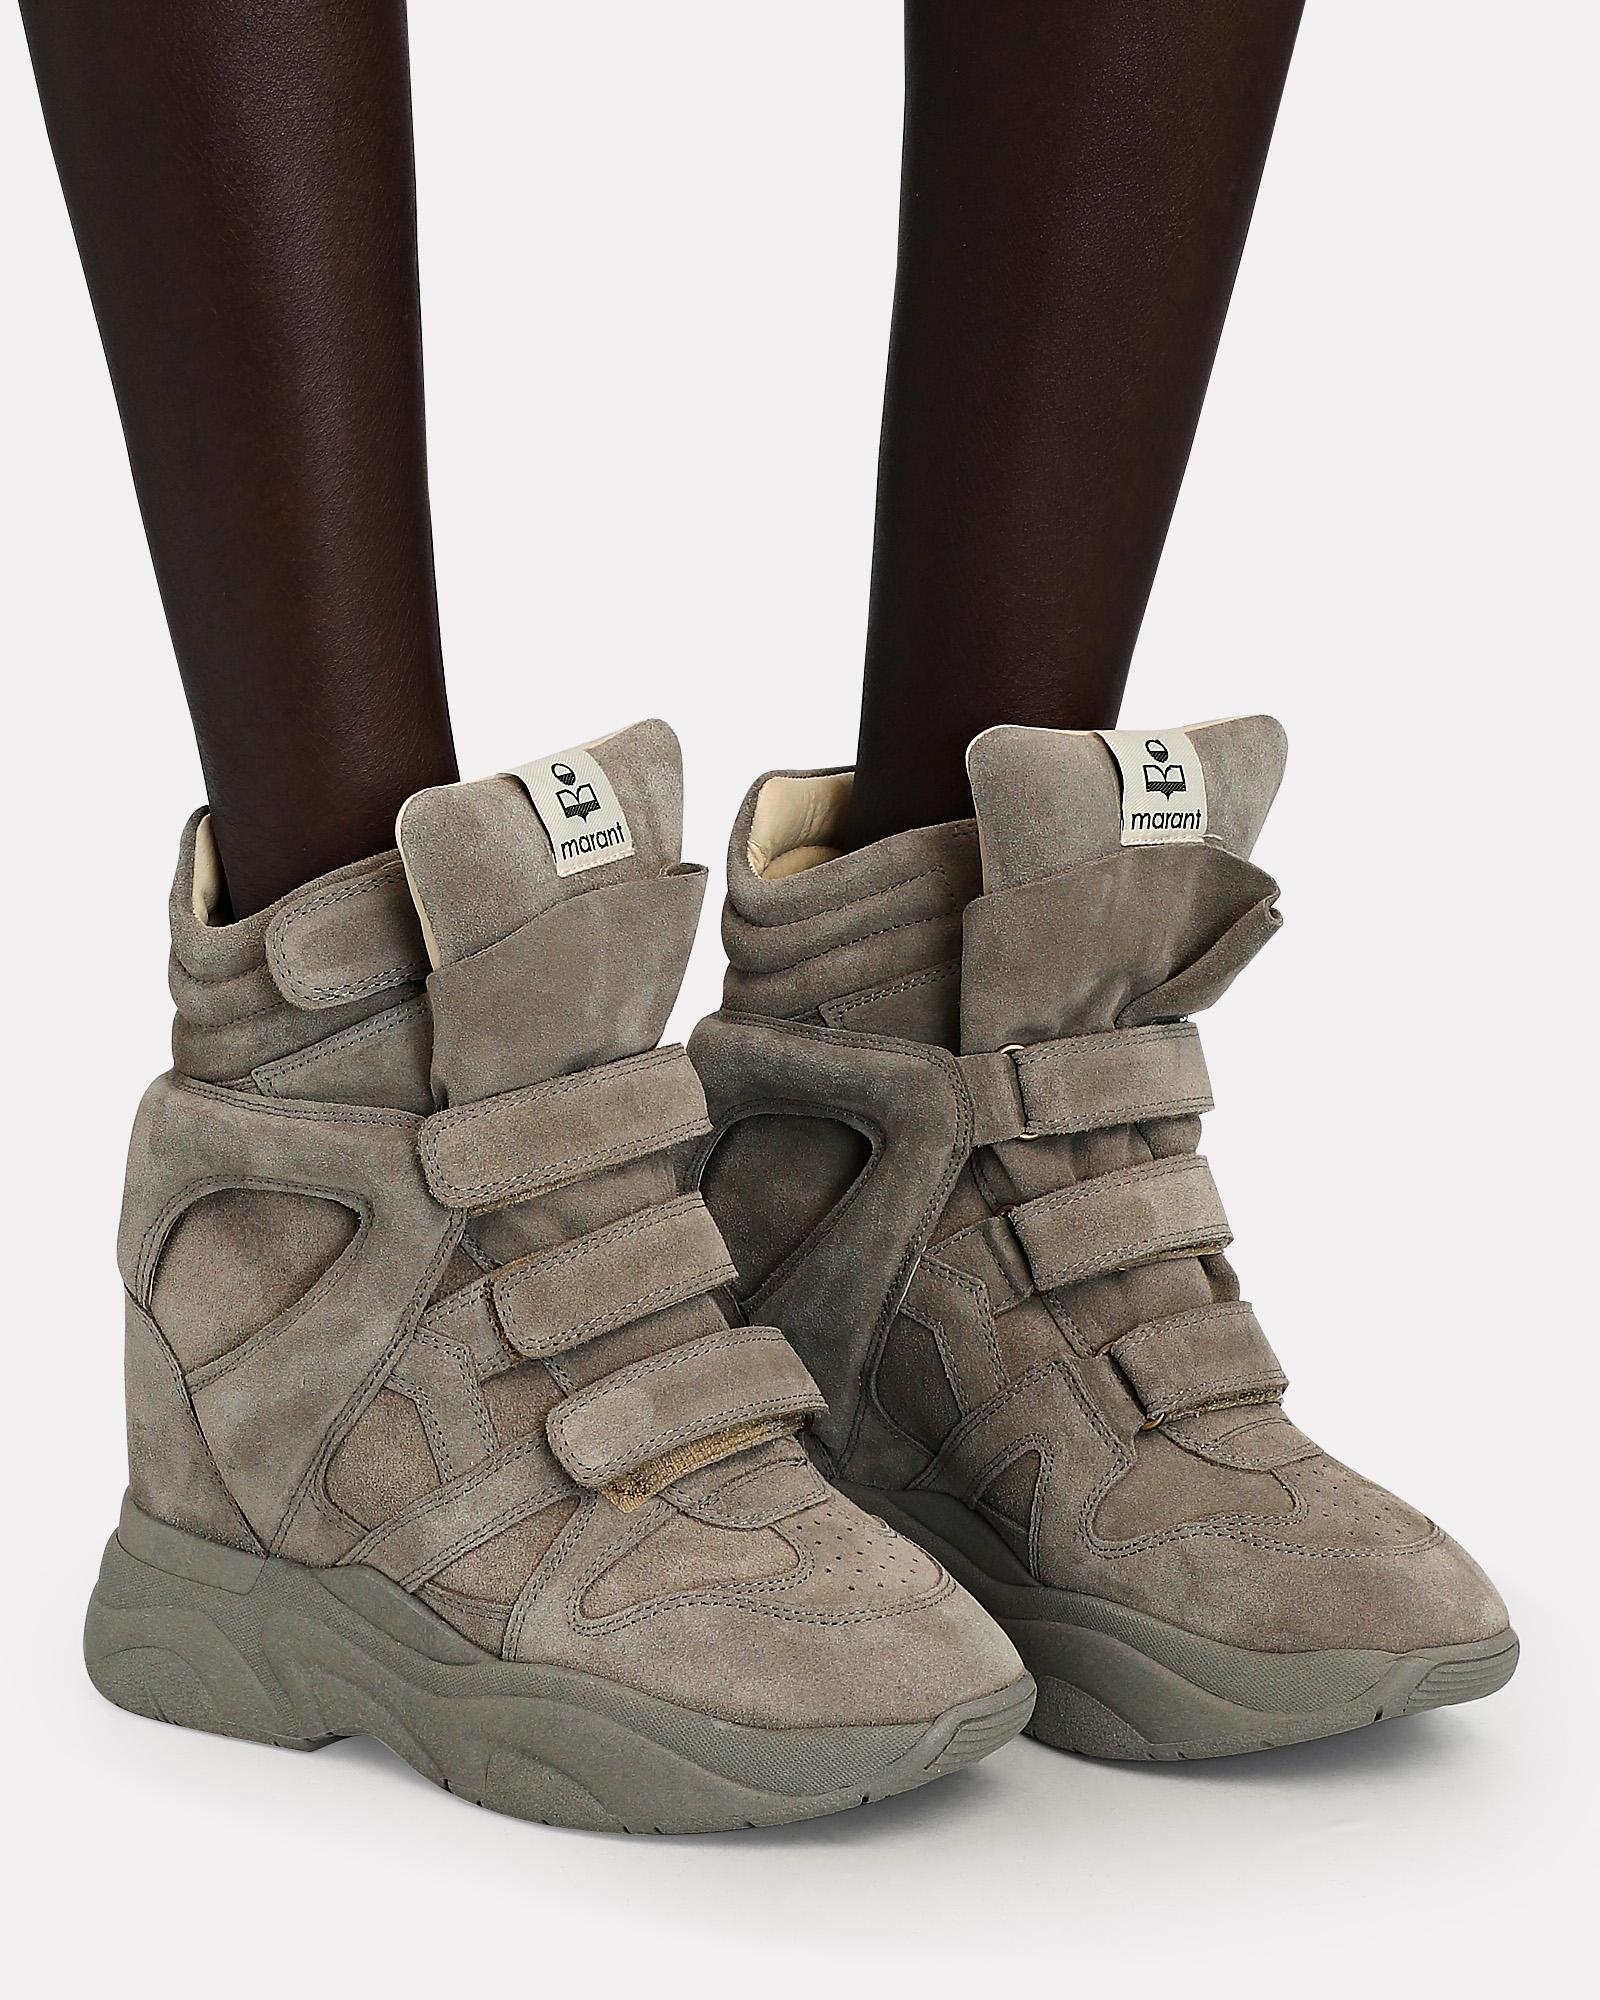 Overvåge tragt lag Isabel Marant Balskee High-top Wedge Sneakers in Gray | Lyst